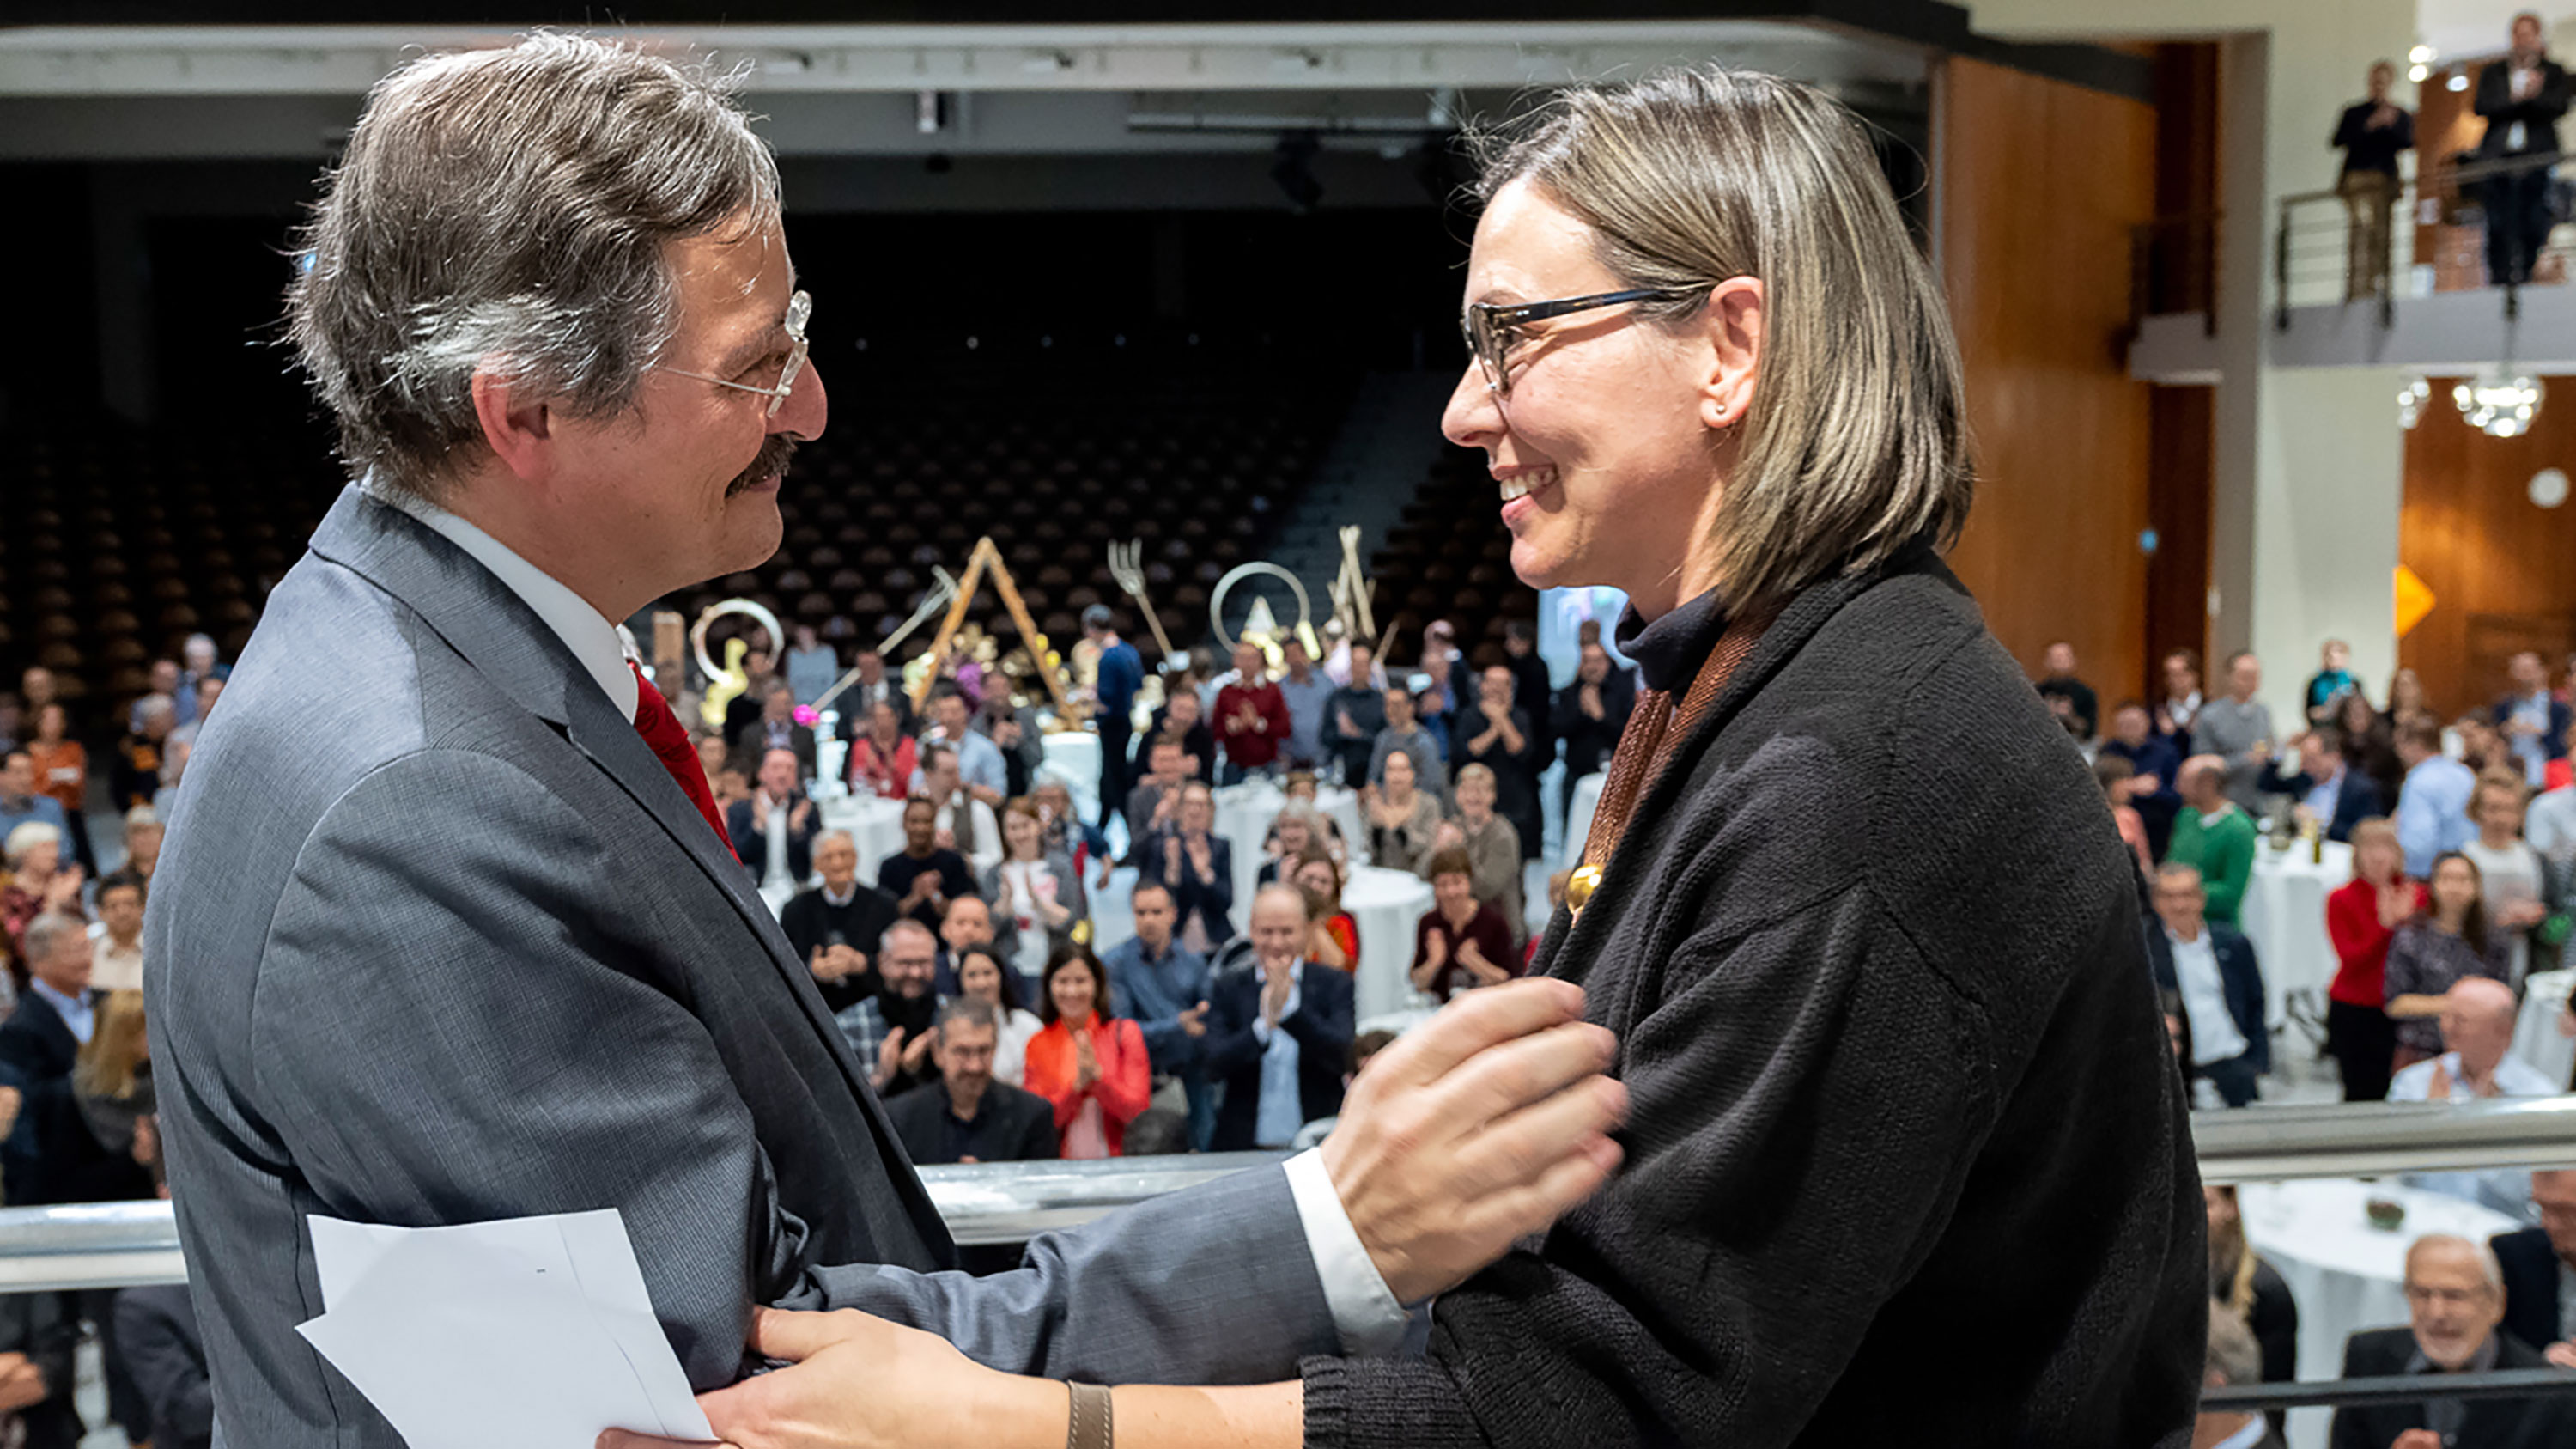 Farewells and thanks: On his last day as President of UZH, Michael Hengartner said goodbye to UZH employees at his farewell apéro.